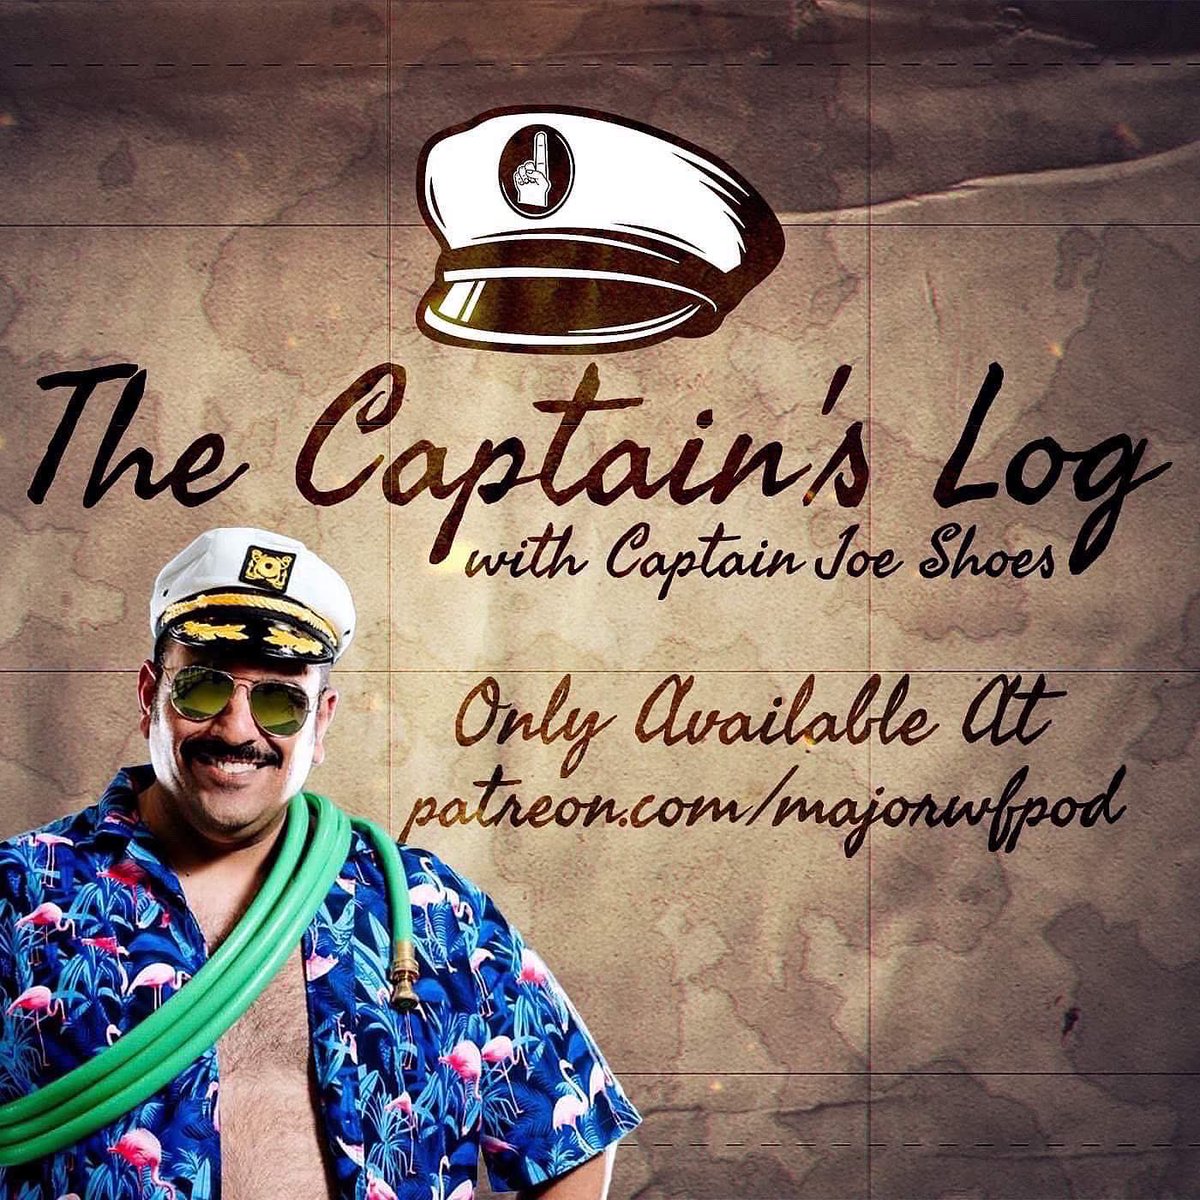 Tonight brings us another episode of The Captain’s Log with @TheJoeShoes! Want to ask a Dudley your own questions? Then sign up to the HARD tier or higher on MajorMarks.com to hangout with Sign Guy Dudley himself, @LDAngeli! See you at 10pm EDT.